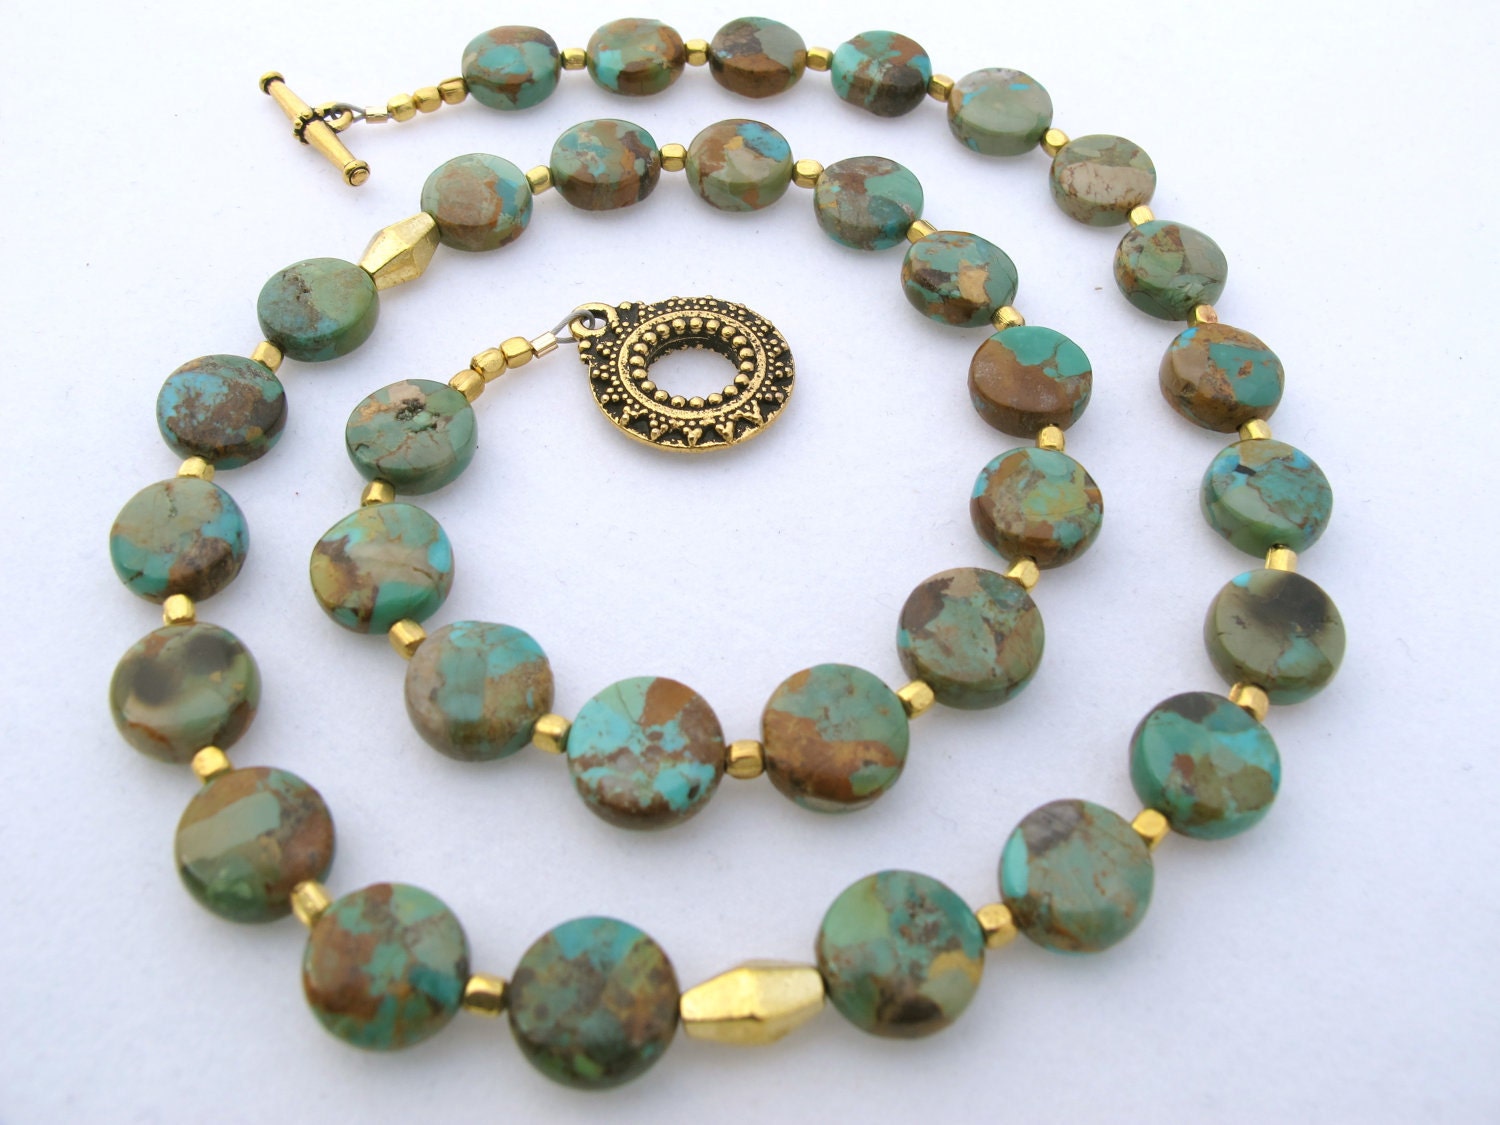 Statement Necklace - Turquoise Impression